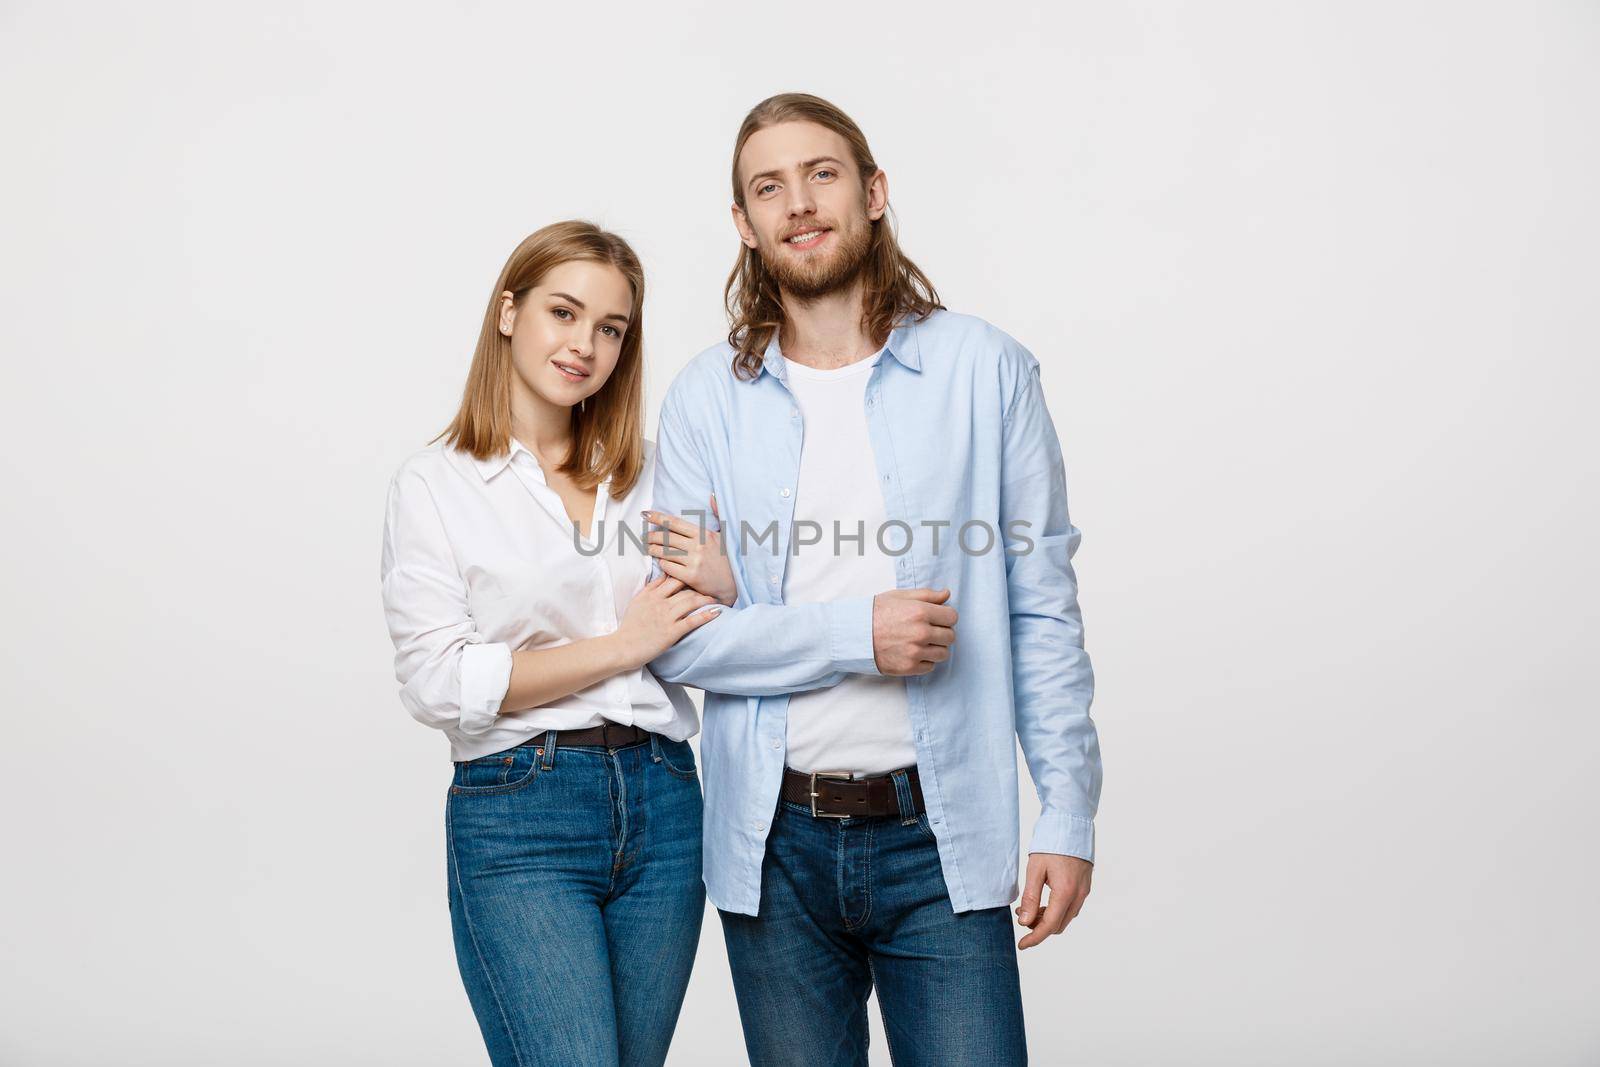 Portrait of attractive young couple smiling for the camera while holding arm to arm. On grey background